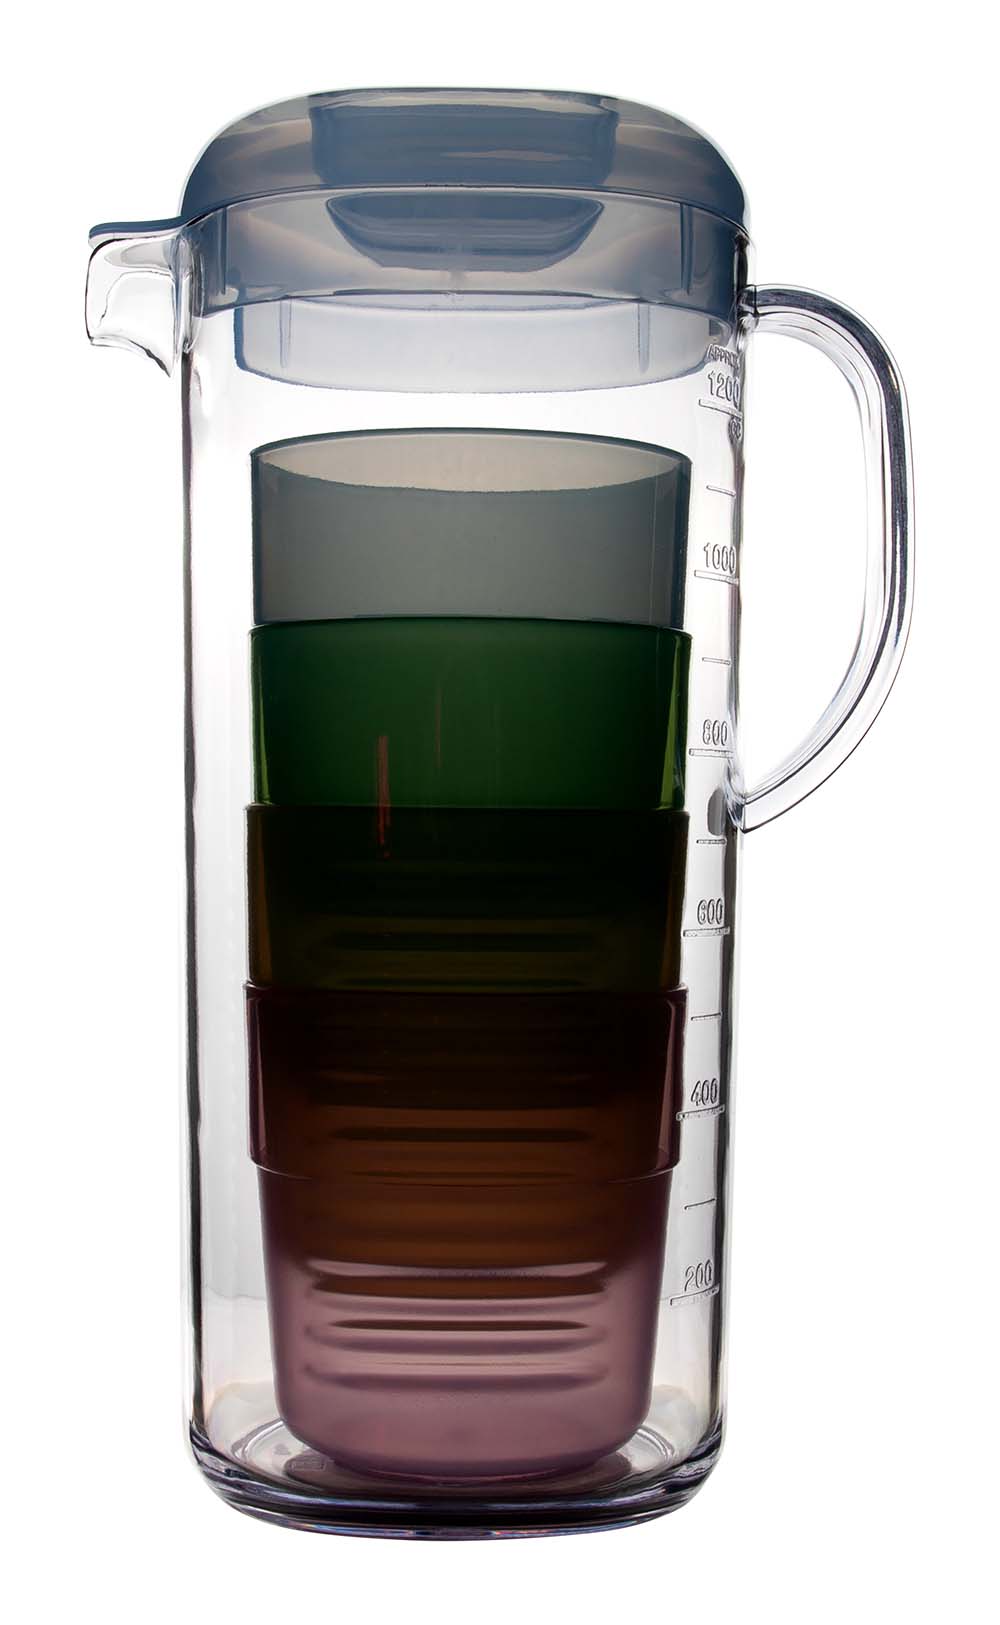 6101410 A handy plastic can with 4 glasses. Ideal for camping or for a picnic. The glasses can be stored in the jug, making it very compact to take with you.